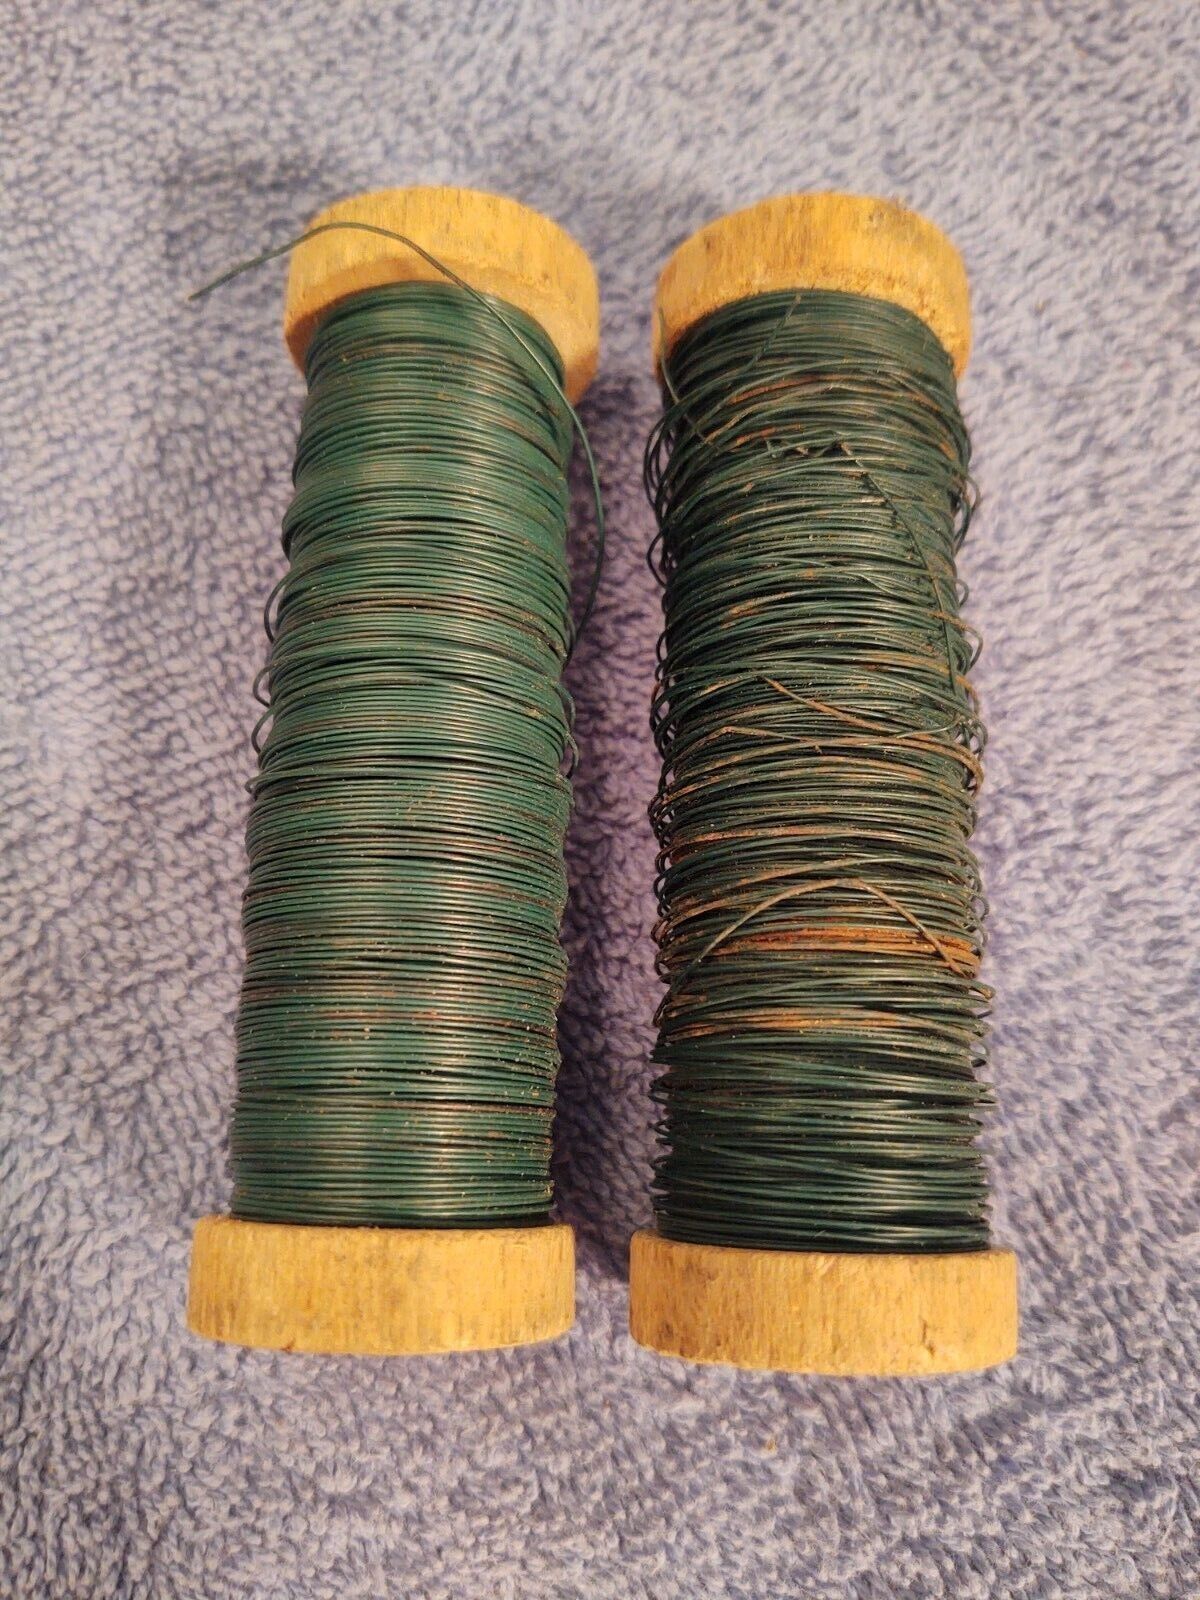 Green Spooled Floral Wire - Approximately 9 Oz. In Total